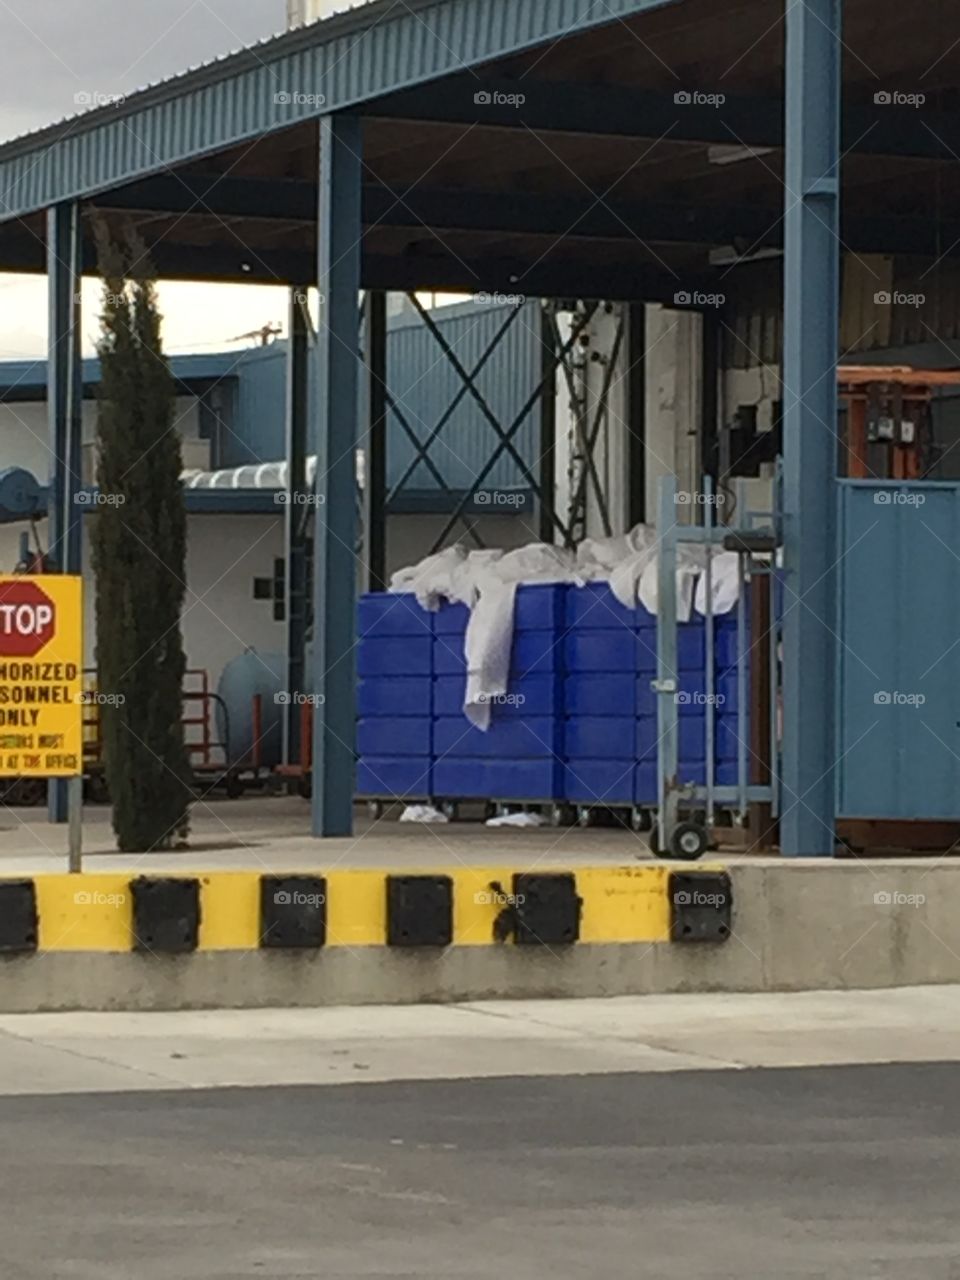 Laundry Facility In Breaking Bad 